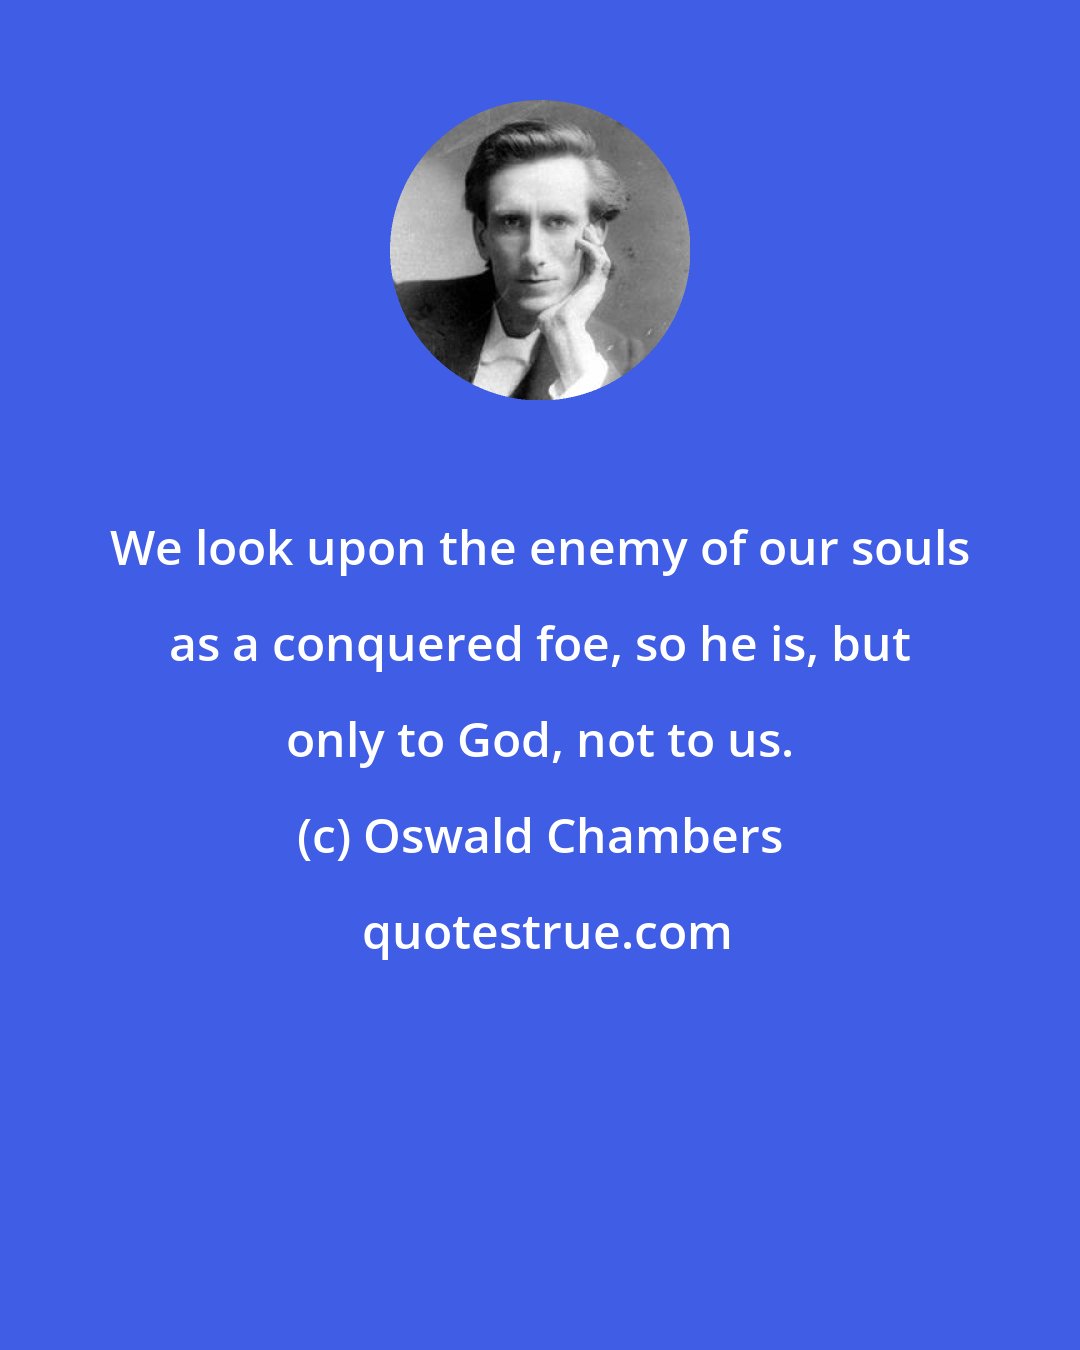 Oswald Chambers: We look upon the enemy of our souls as a conquered foe, so he is, but only to God, not to us.